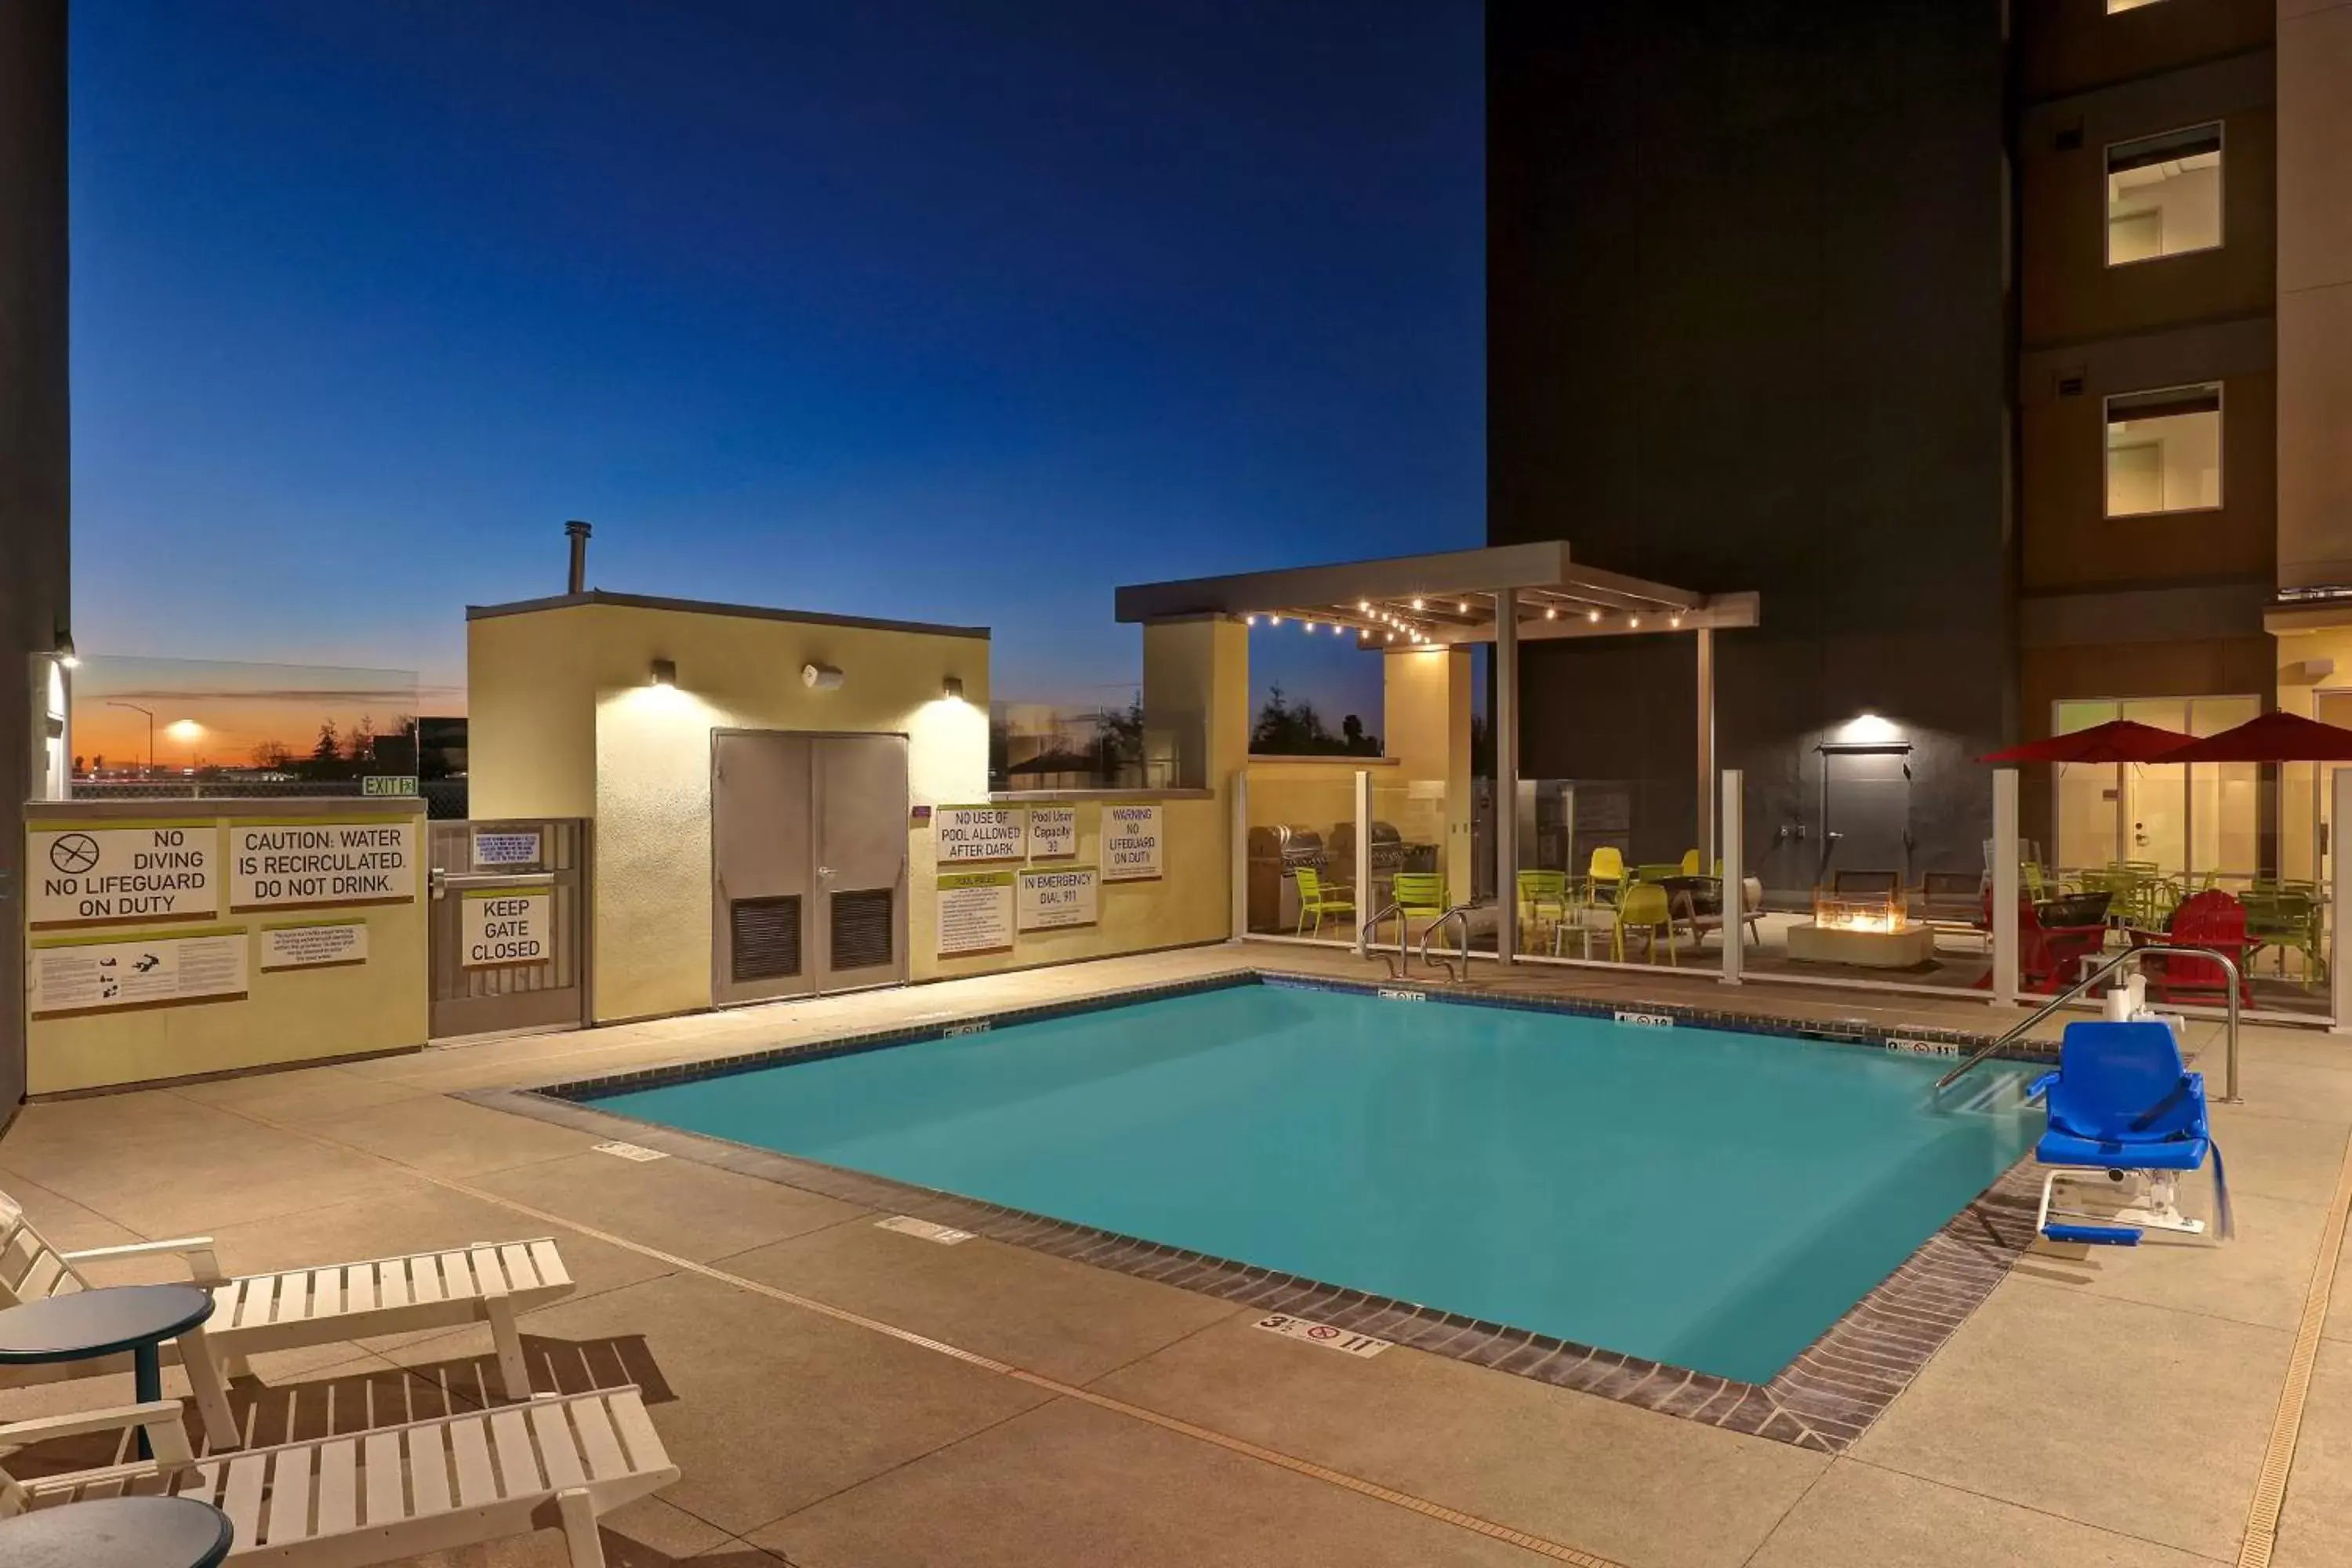 Property building, Swimming Pool in Home2 Suites By Hilton Turlock, Ca